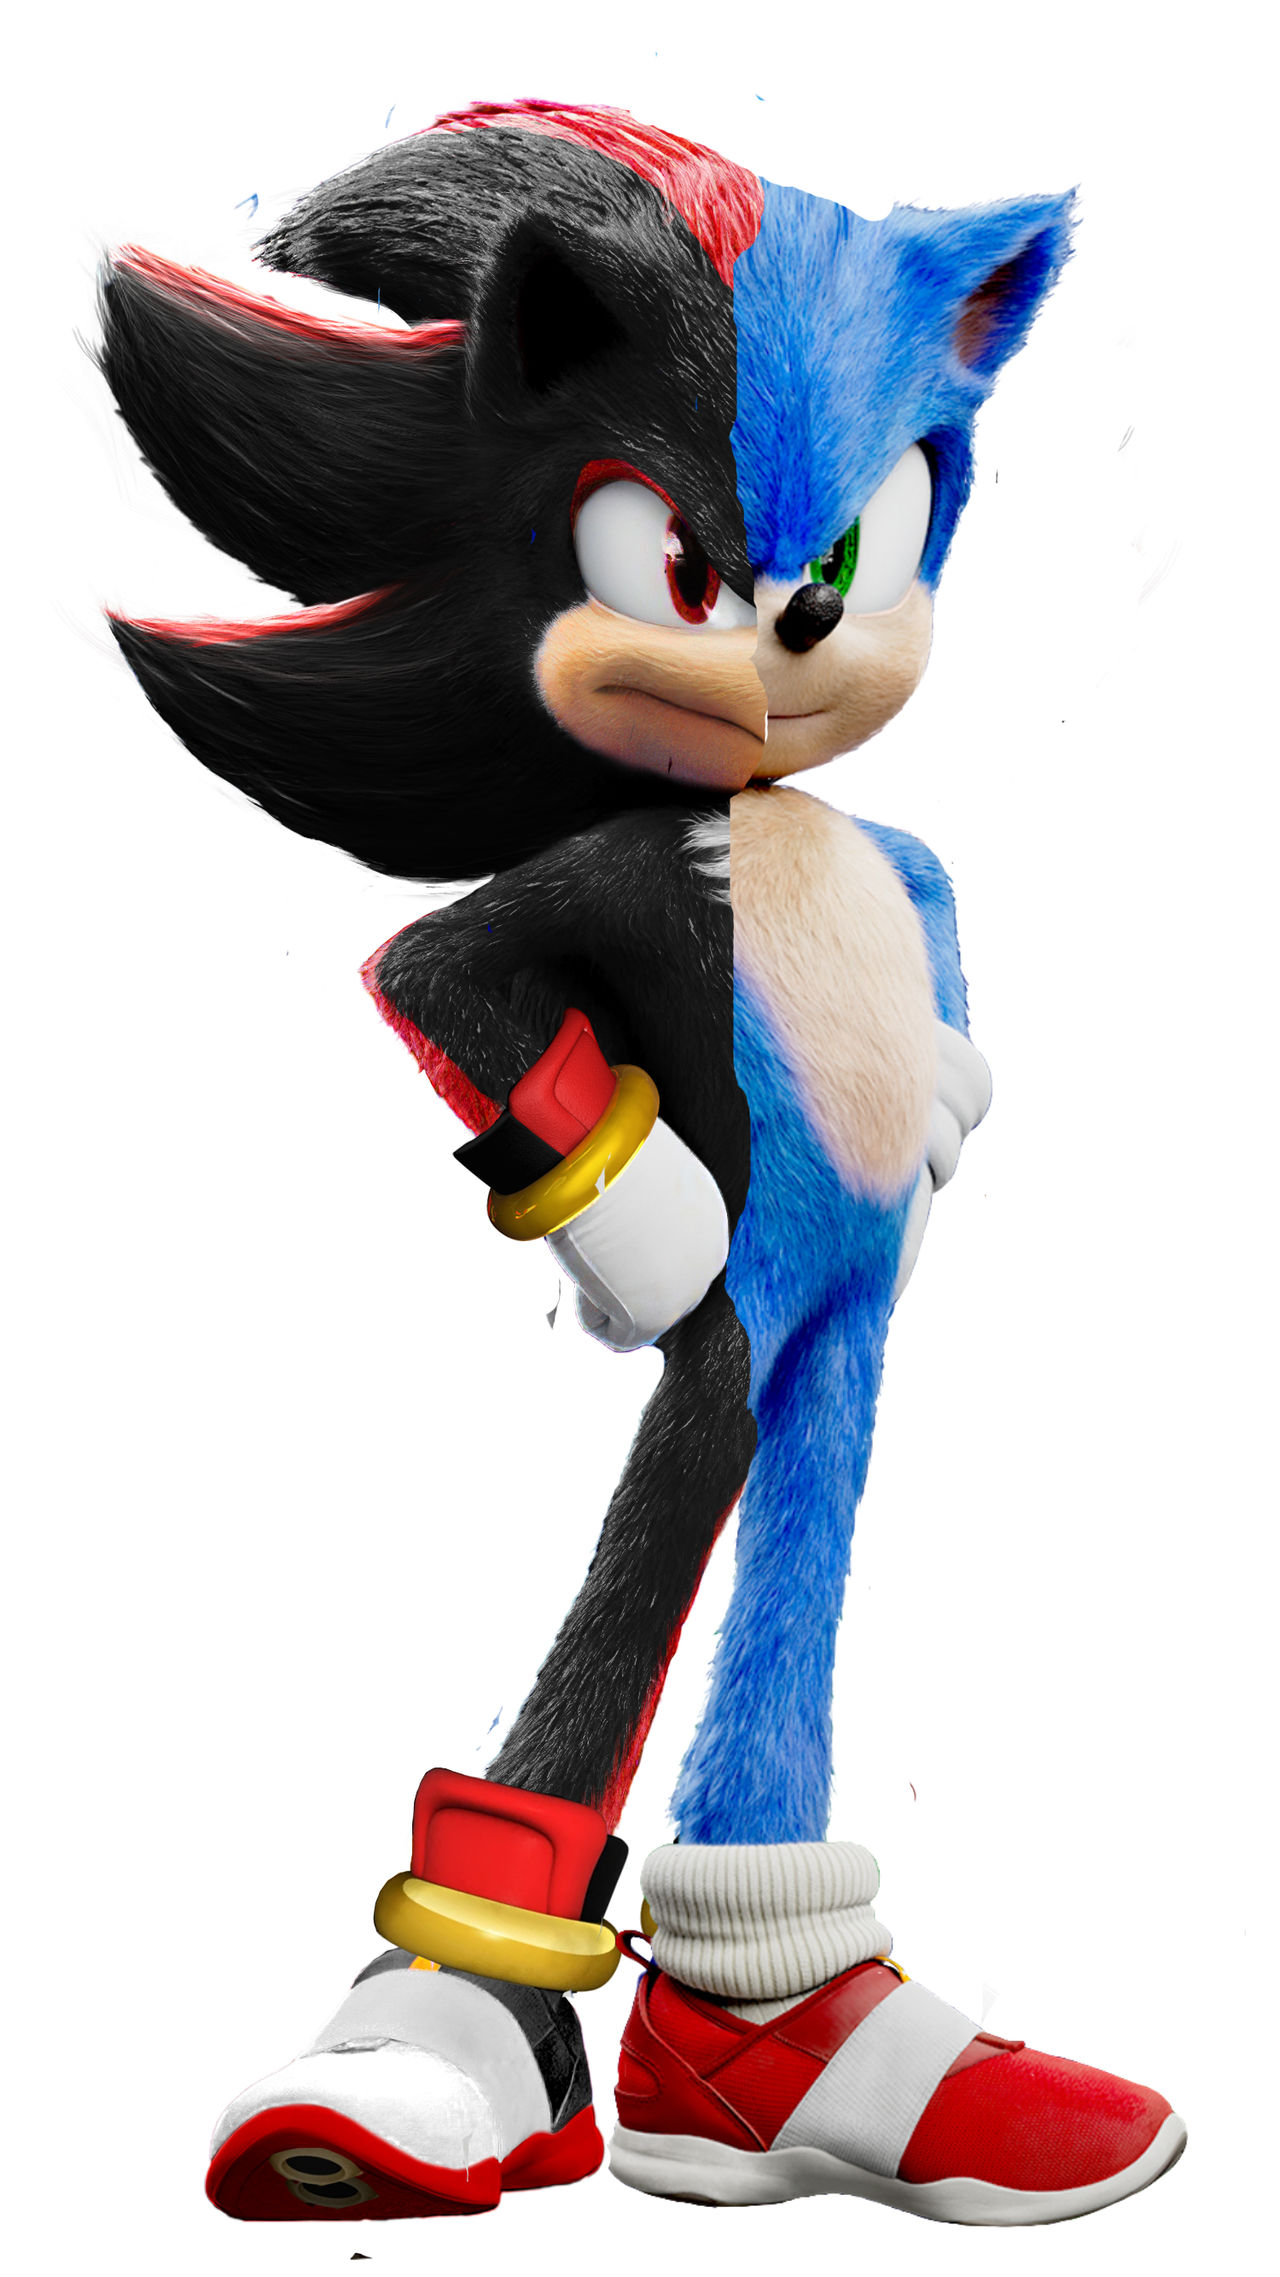 sonic and shadow fusion by fnfbrian123 on DeviantArt